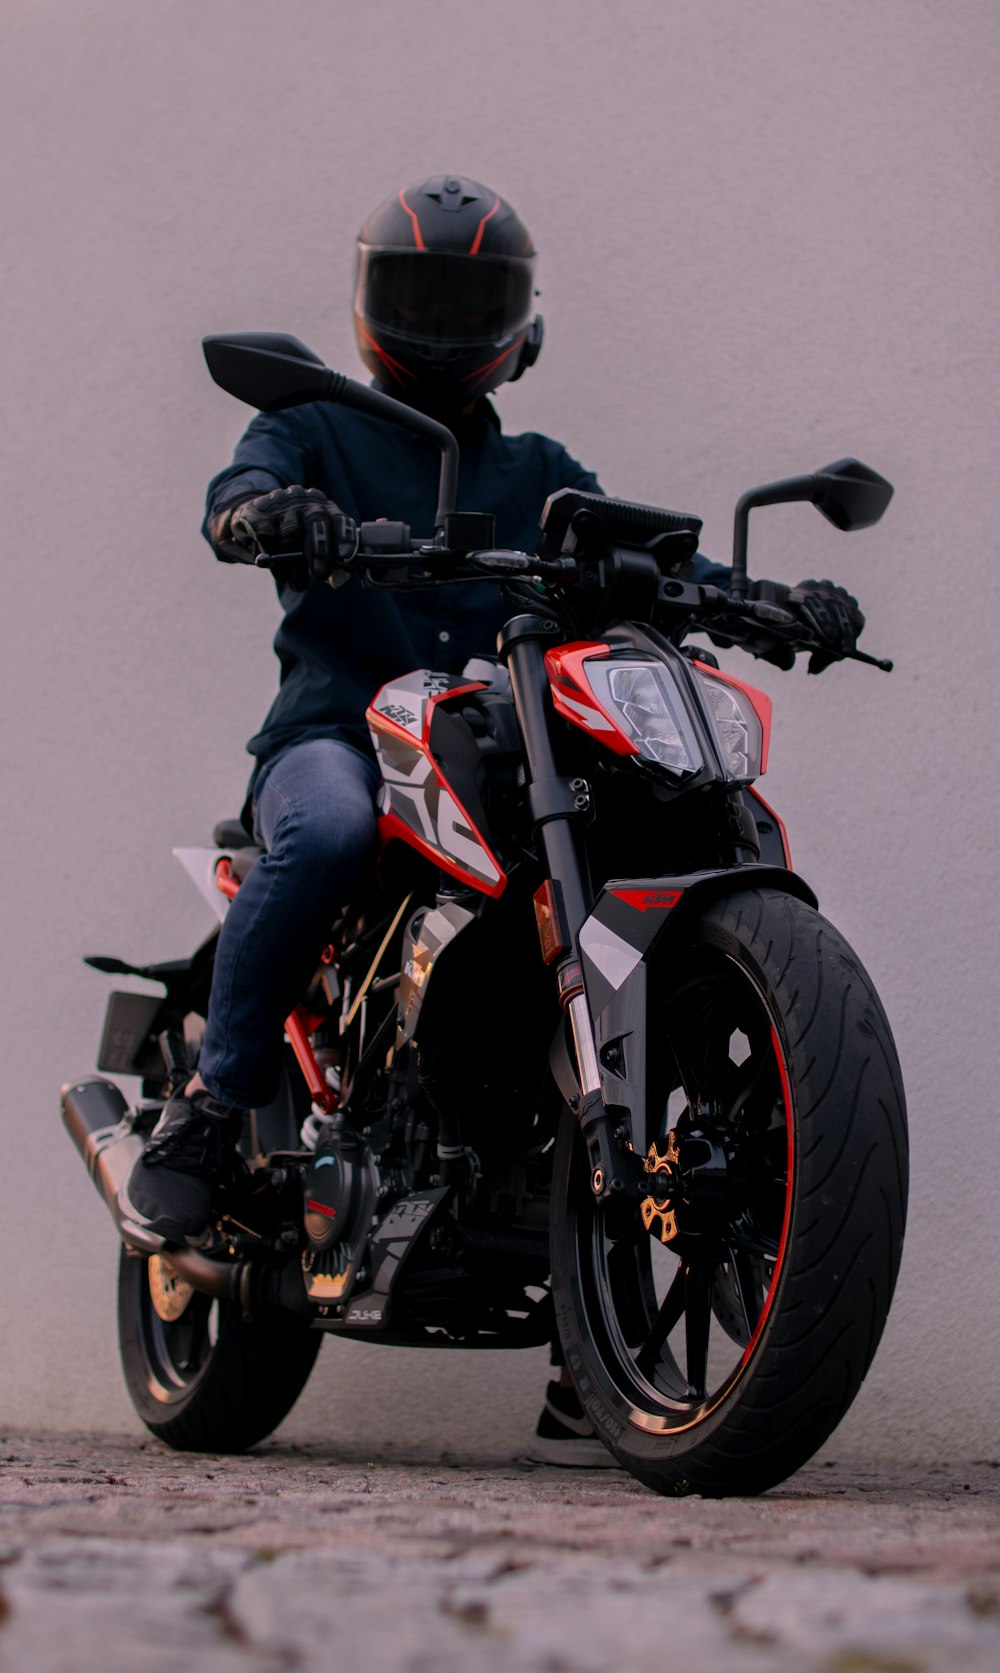 A person on a motorcycle with a helmet on photo – Free Baden-württemberg  Image on Unsplash